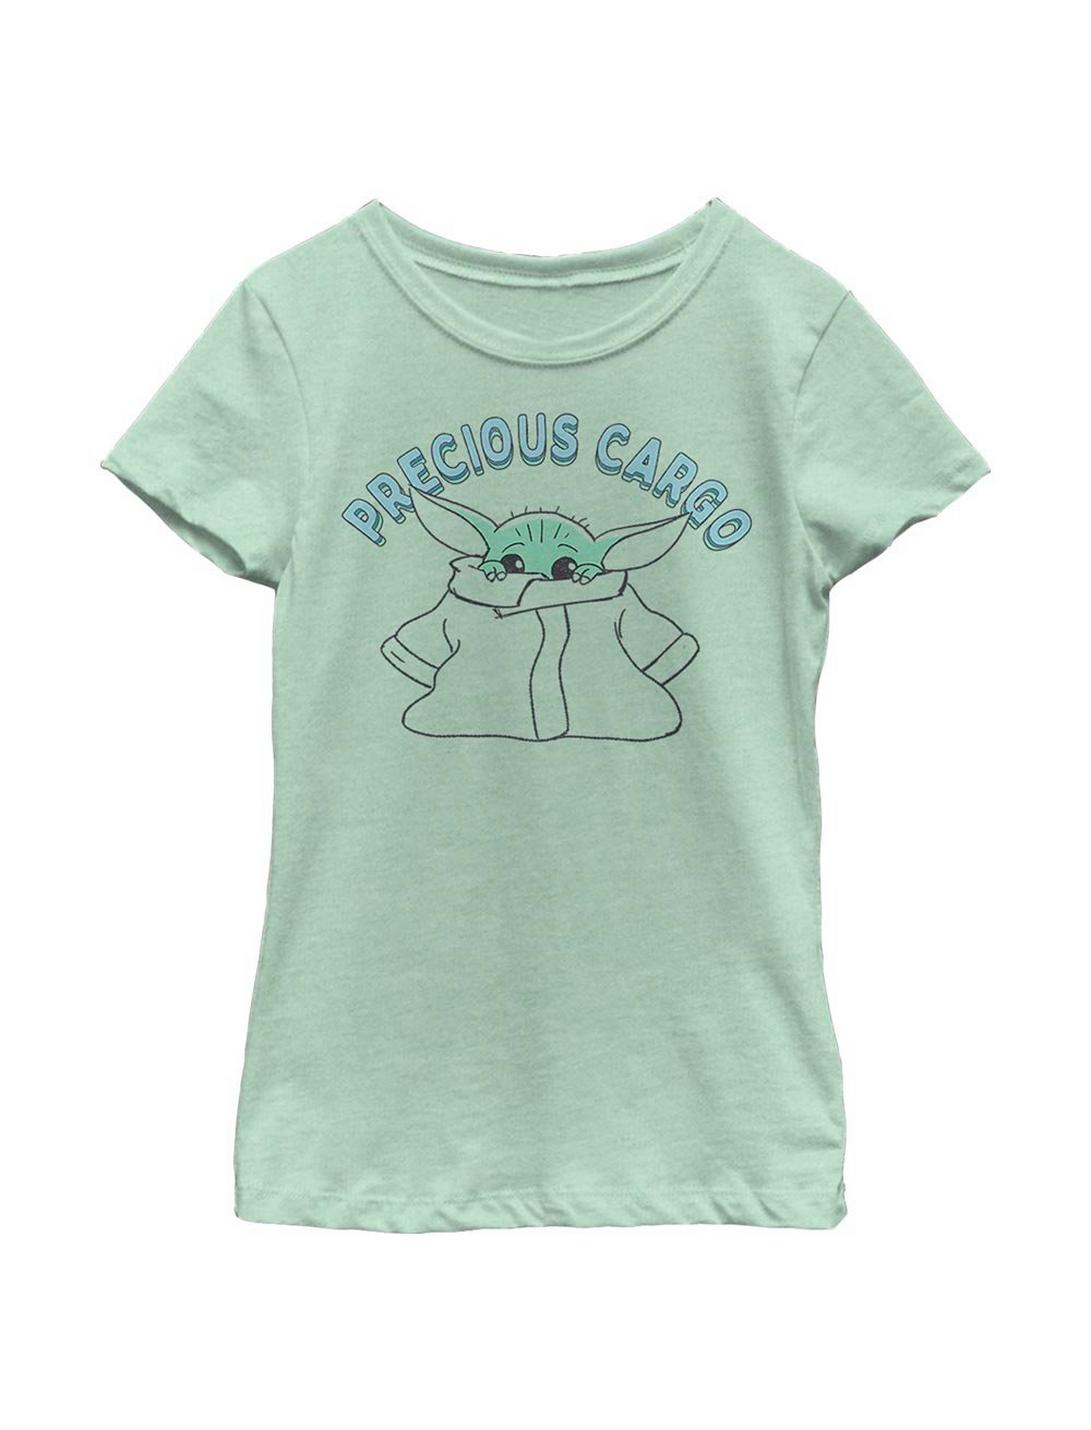 Plus Size Star Wars The Mandalorian The Child Precious Cargo Youth Girls T-Shirt, MINT, hi-res